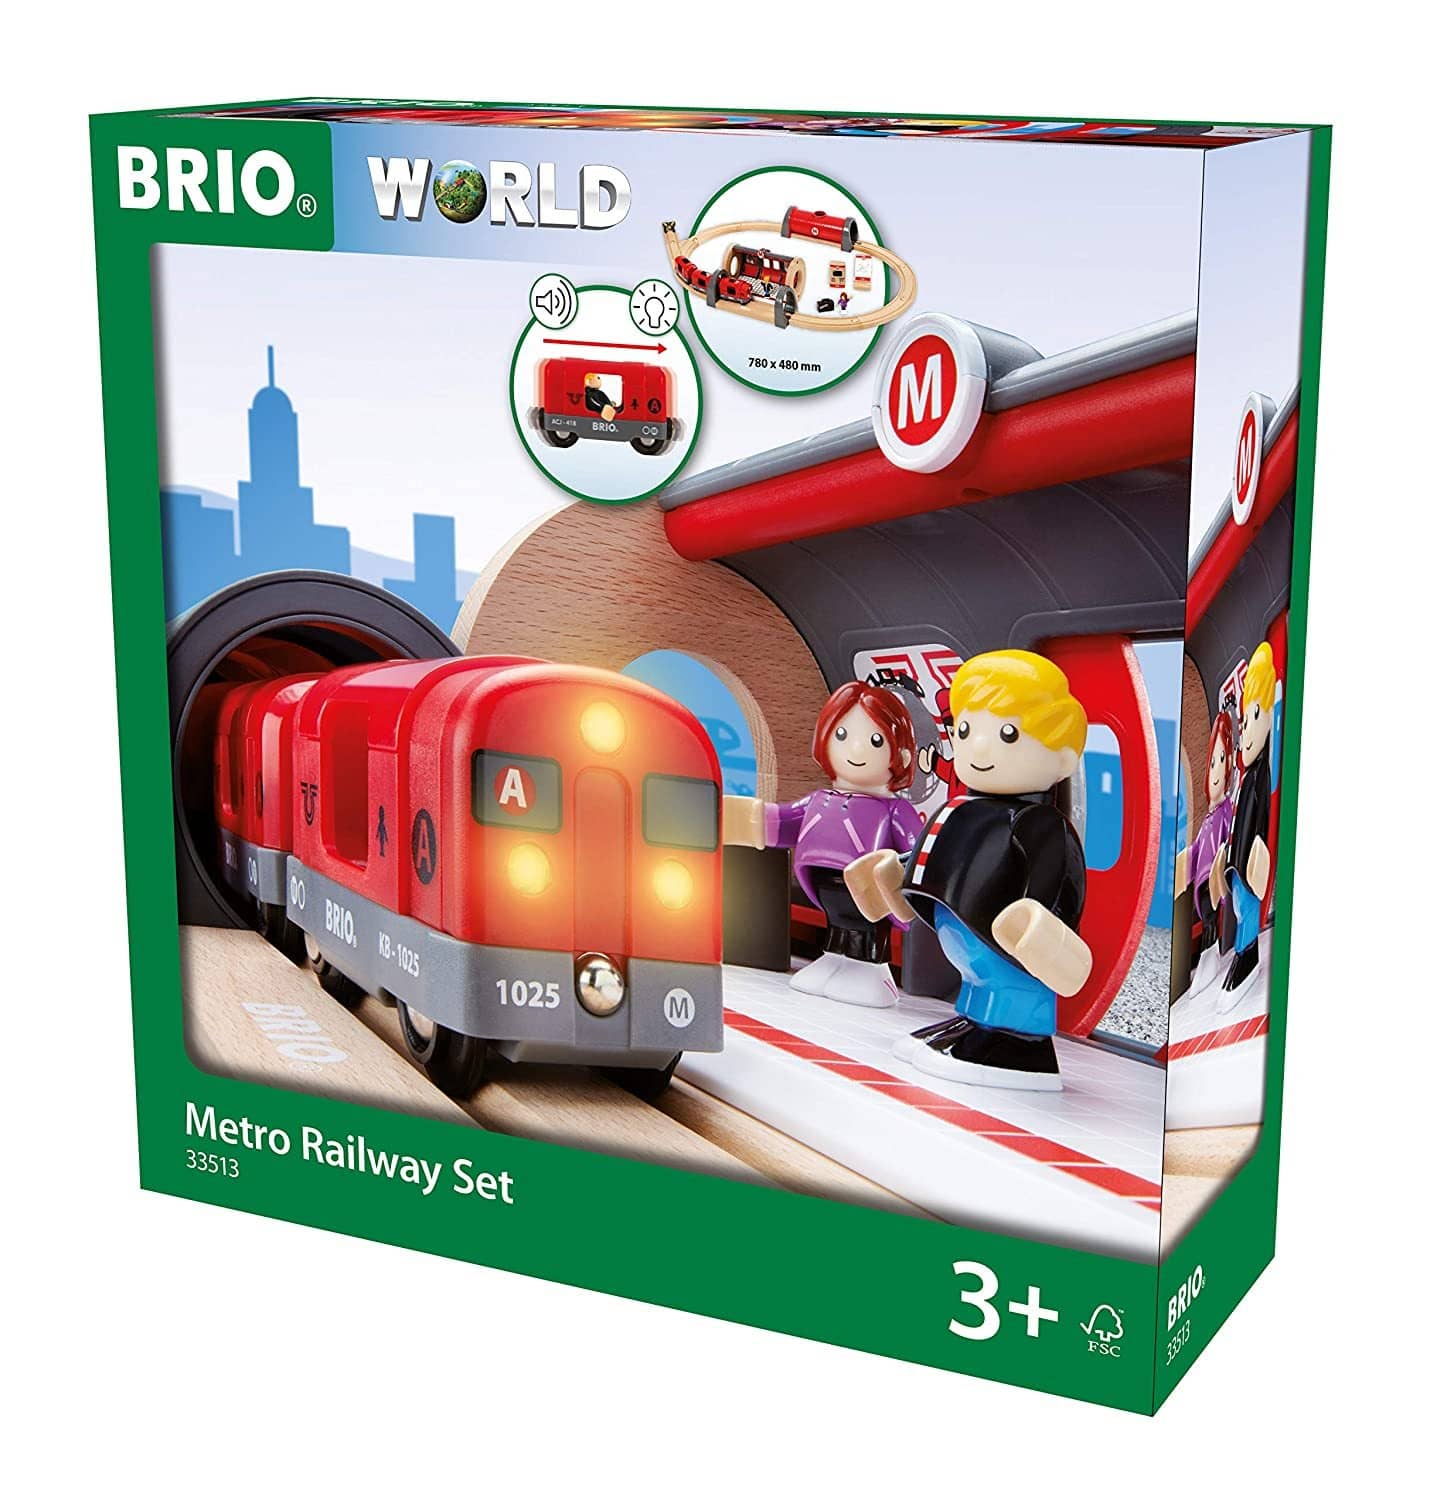 Brio 33513 Metro Railway Set | 20 Piece Train Toy With Accessories And Wooden Tracks For Kids Age 3 And Up-Kidding Around NYC